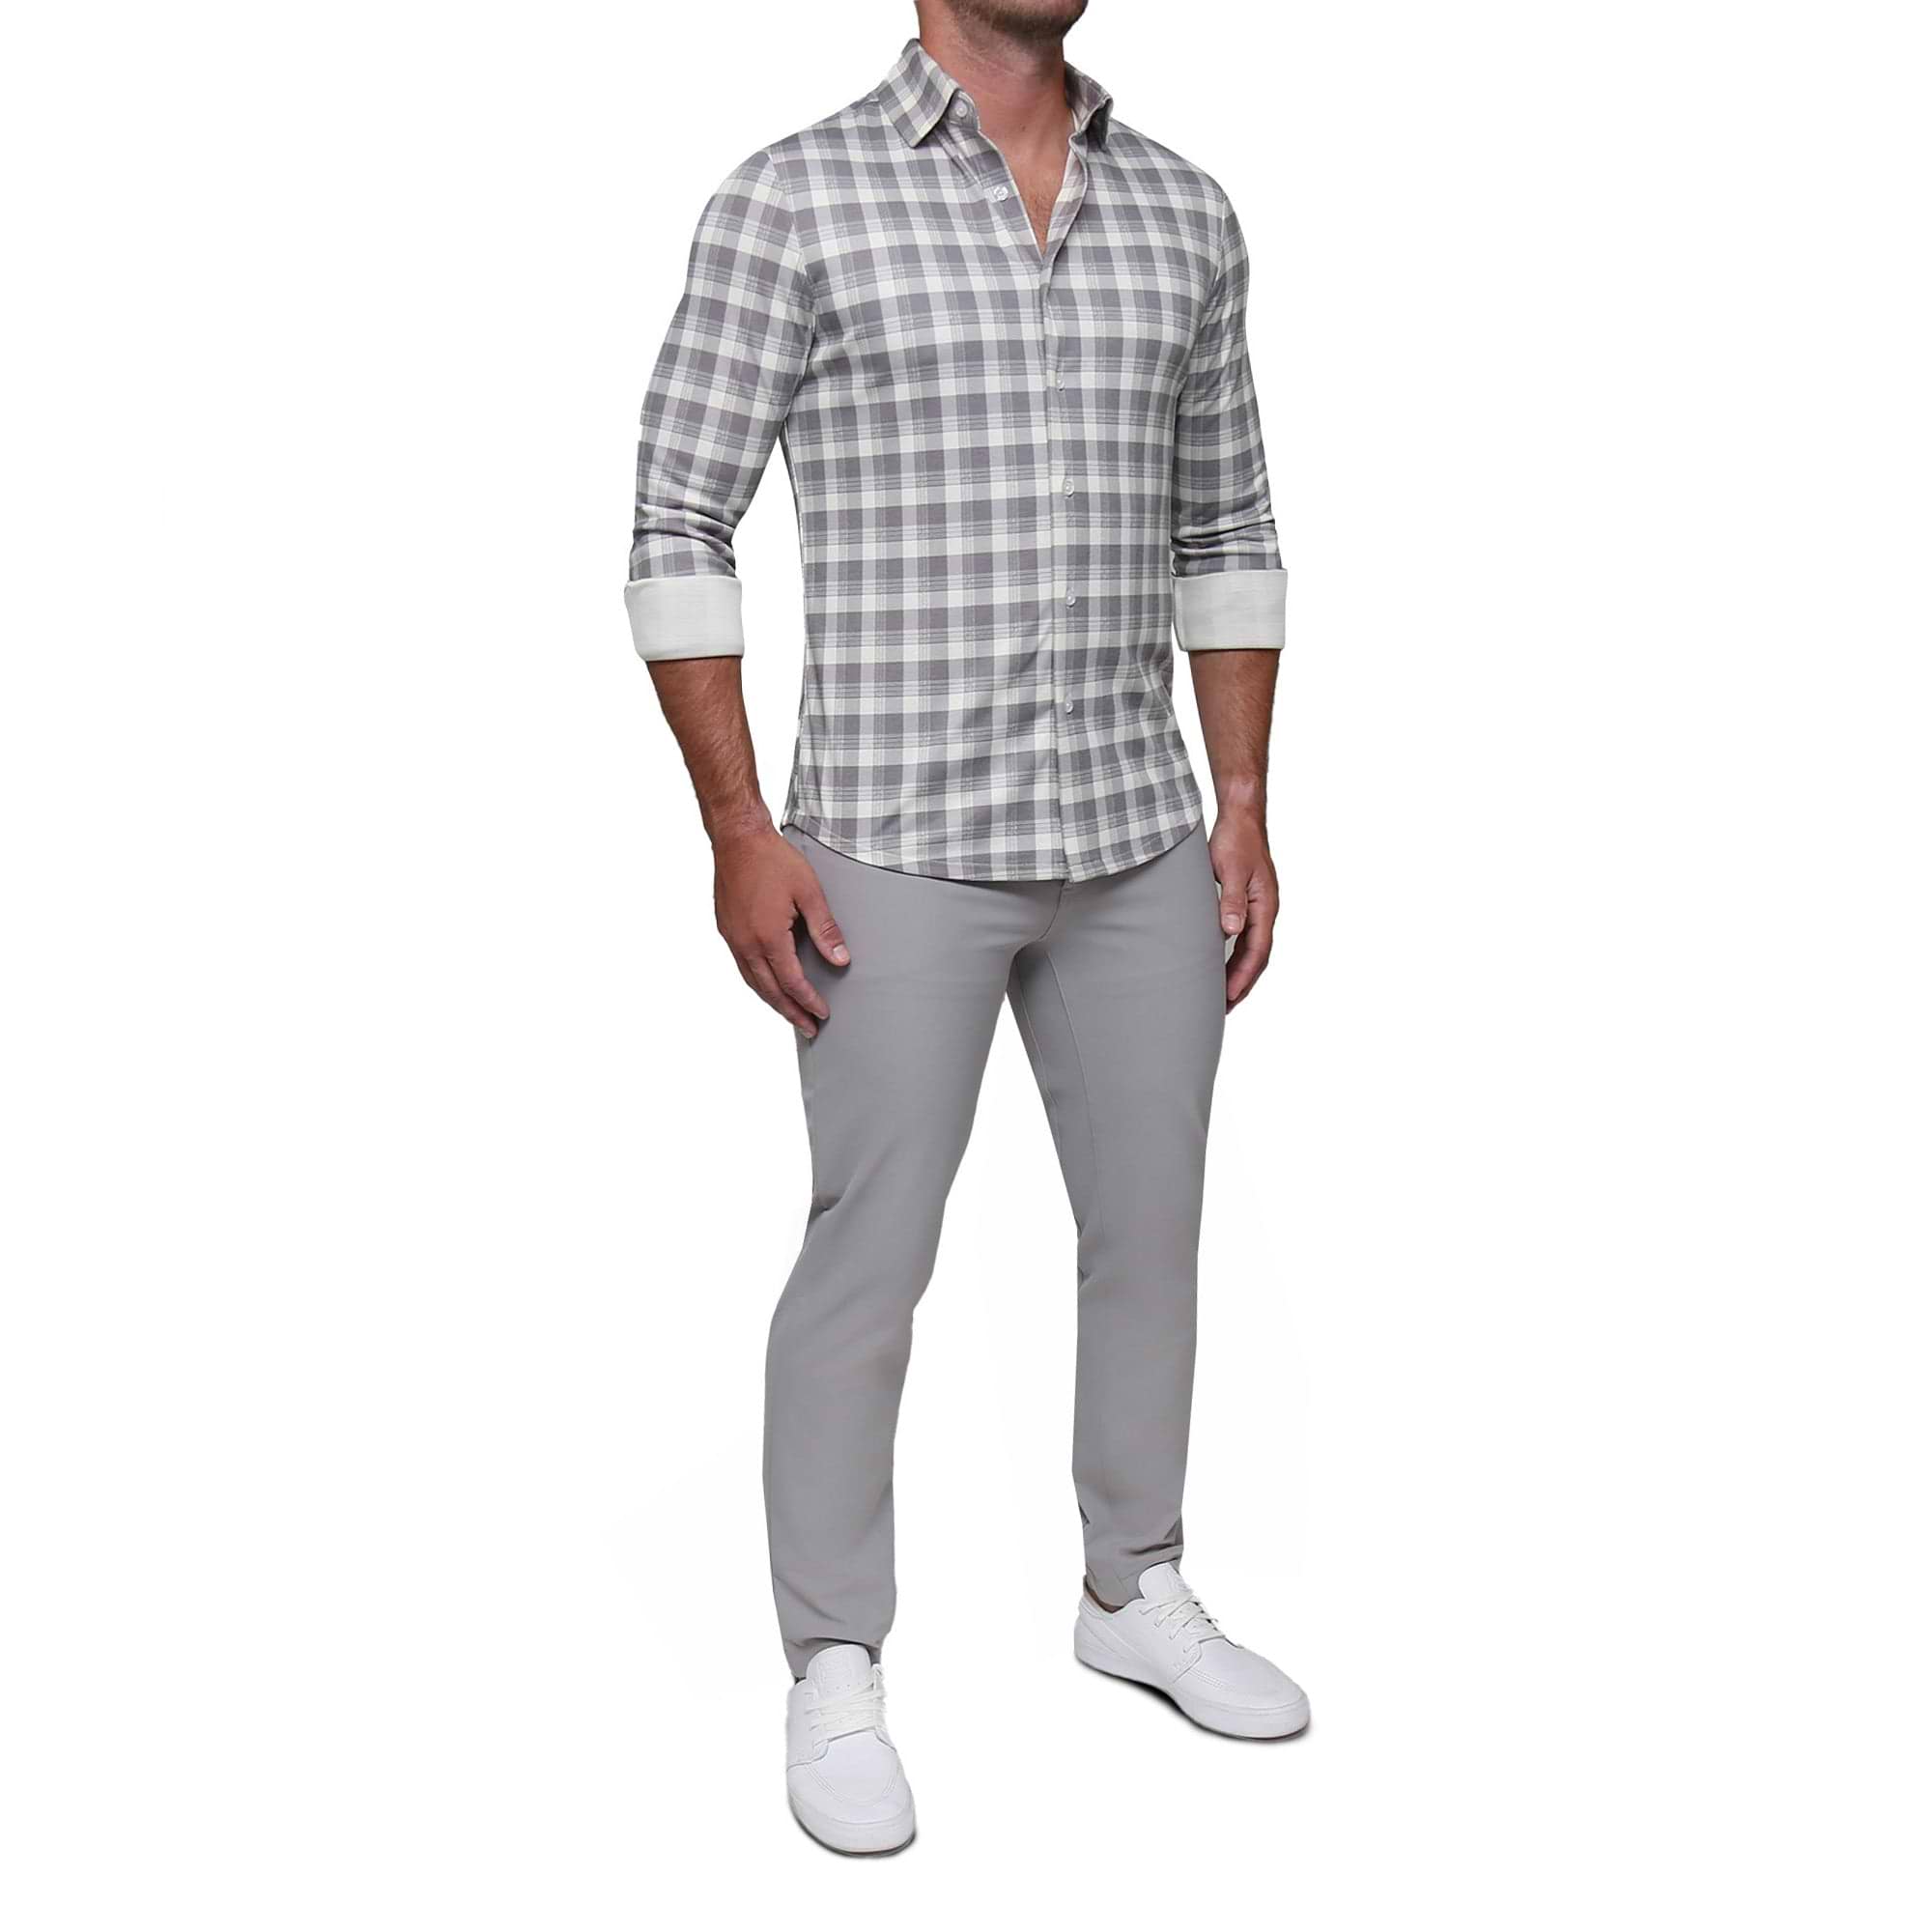 "The Holden" Grey Plaid Casual Button Down